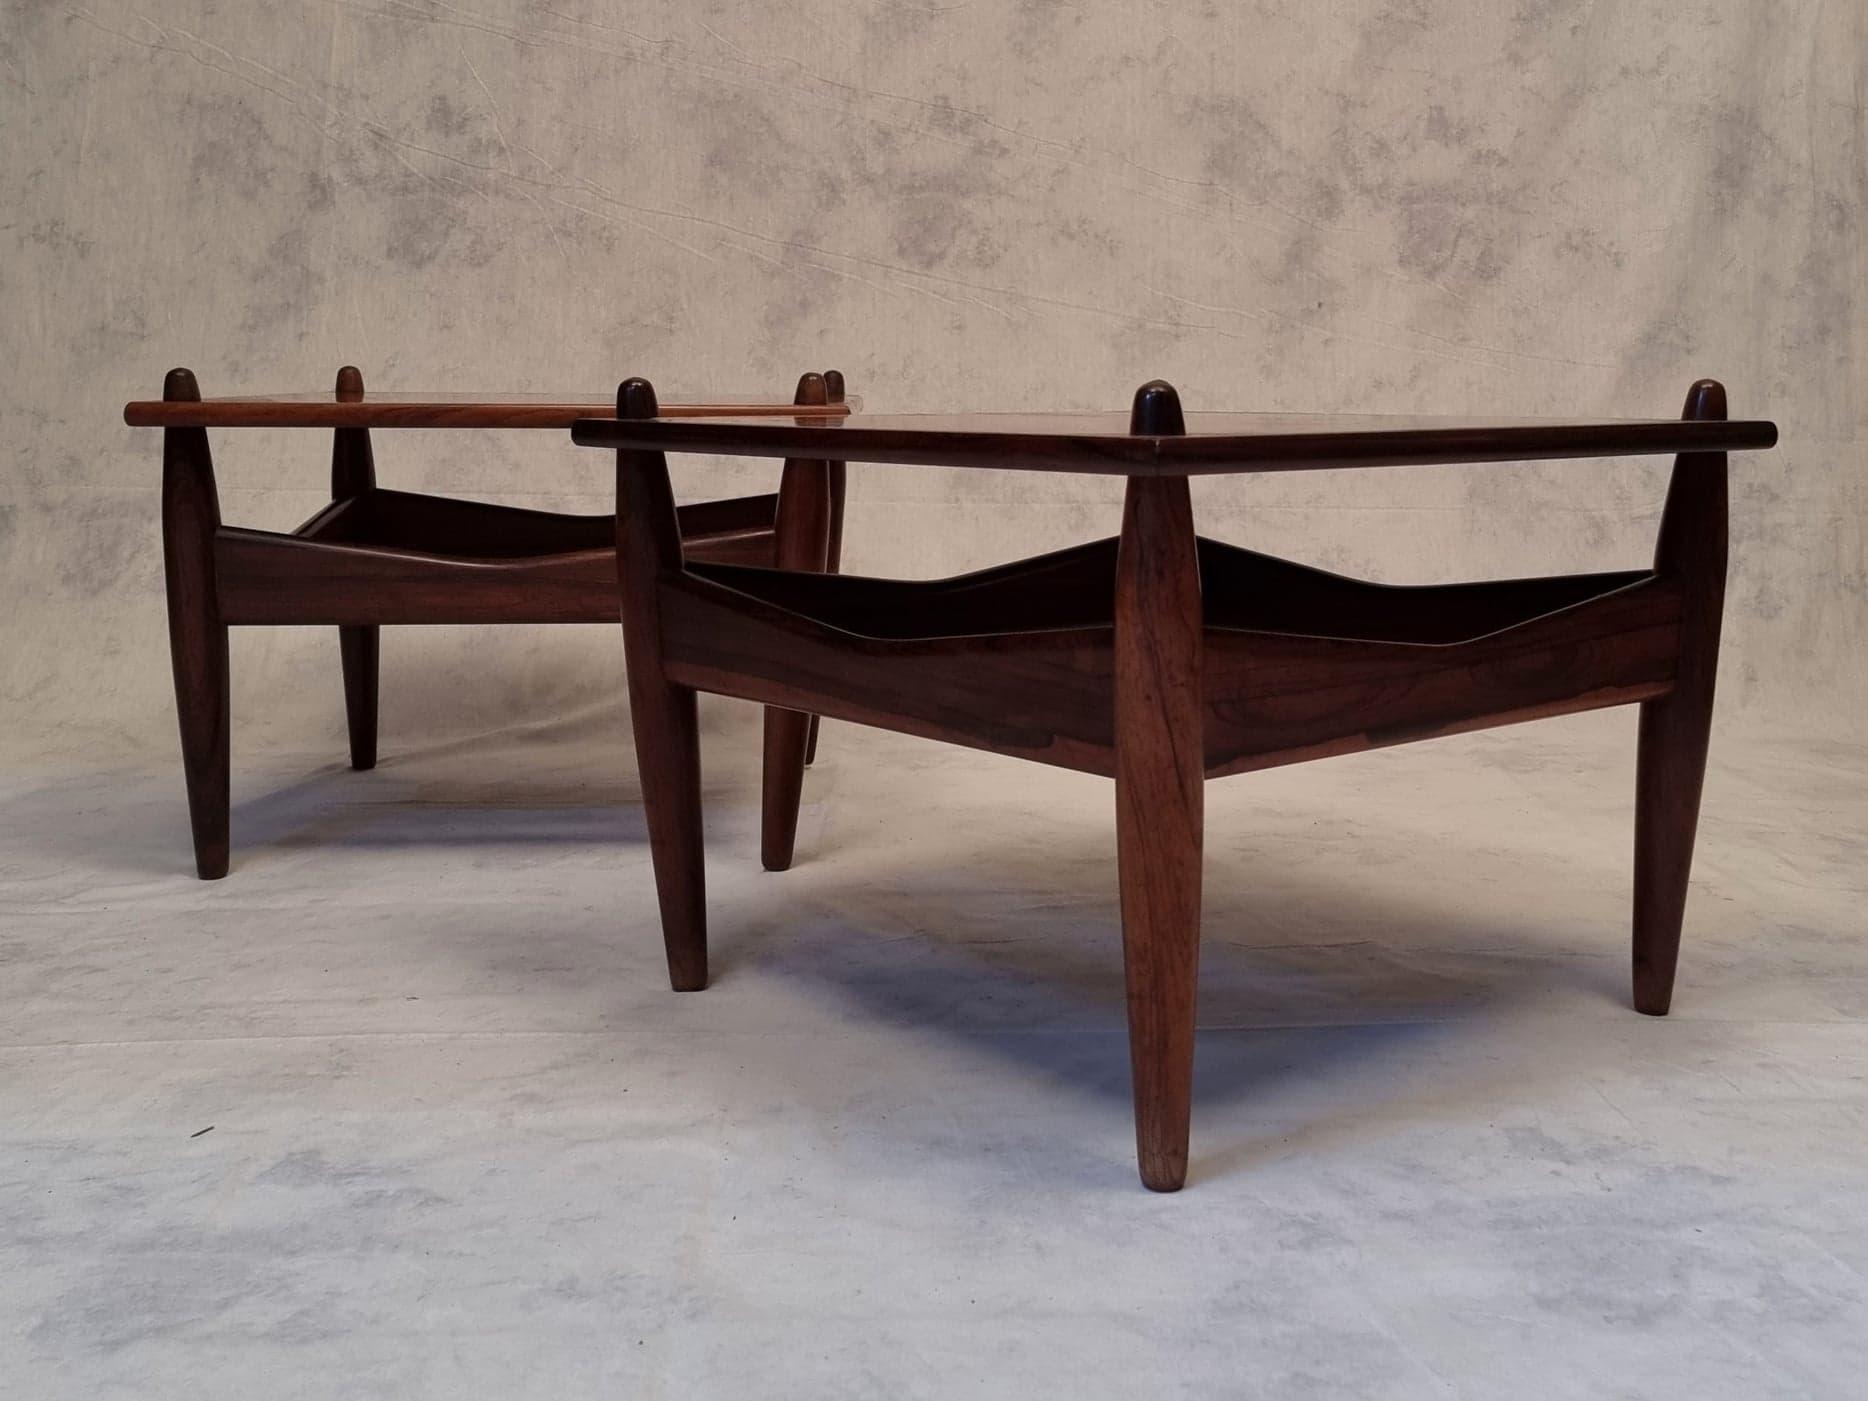 Pair Of Side Tables By Illum Wikkelsø – N°272, Rosewood, Ca 1950 For Sale 7